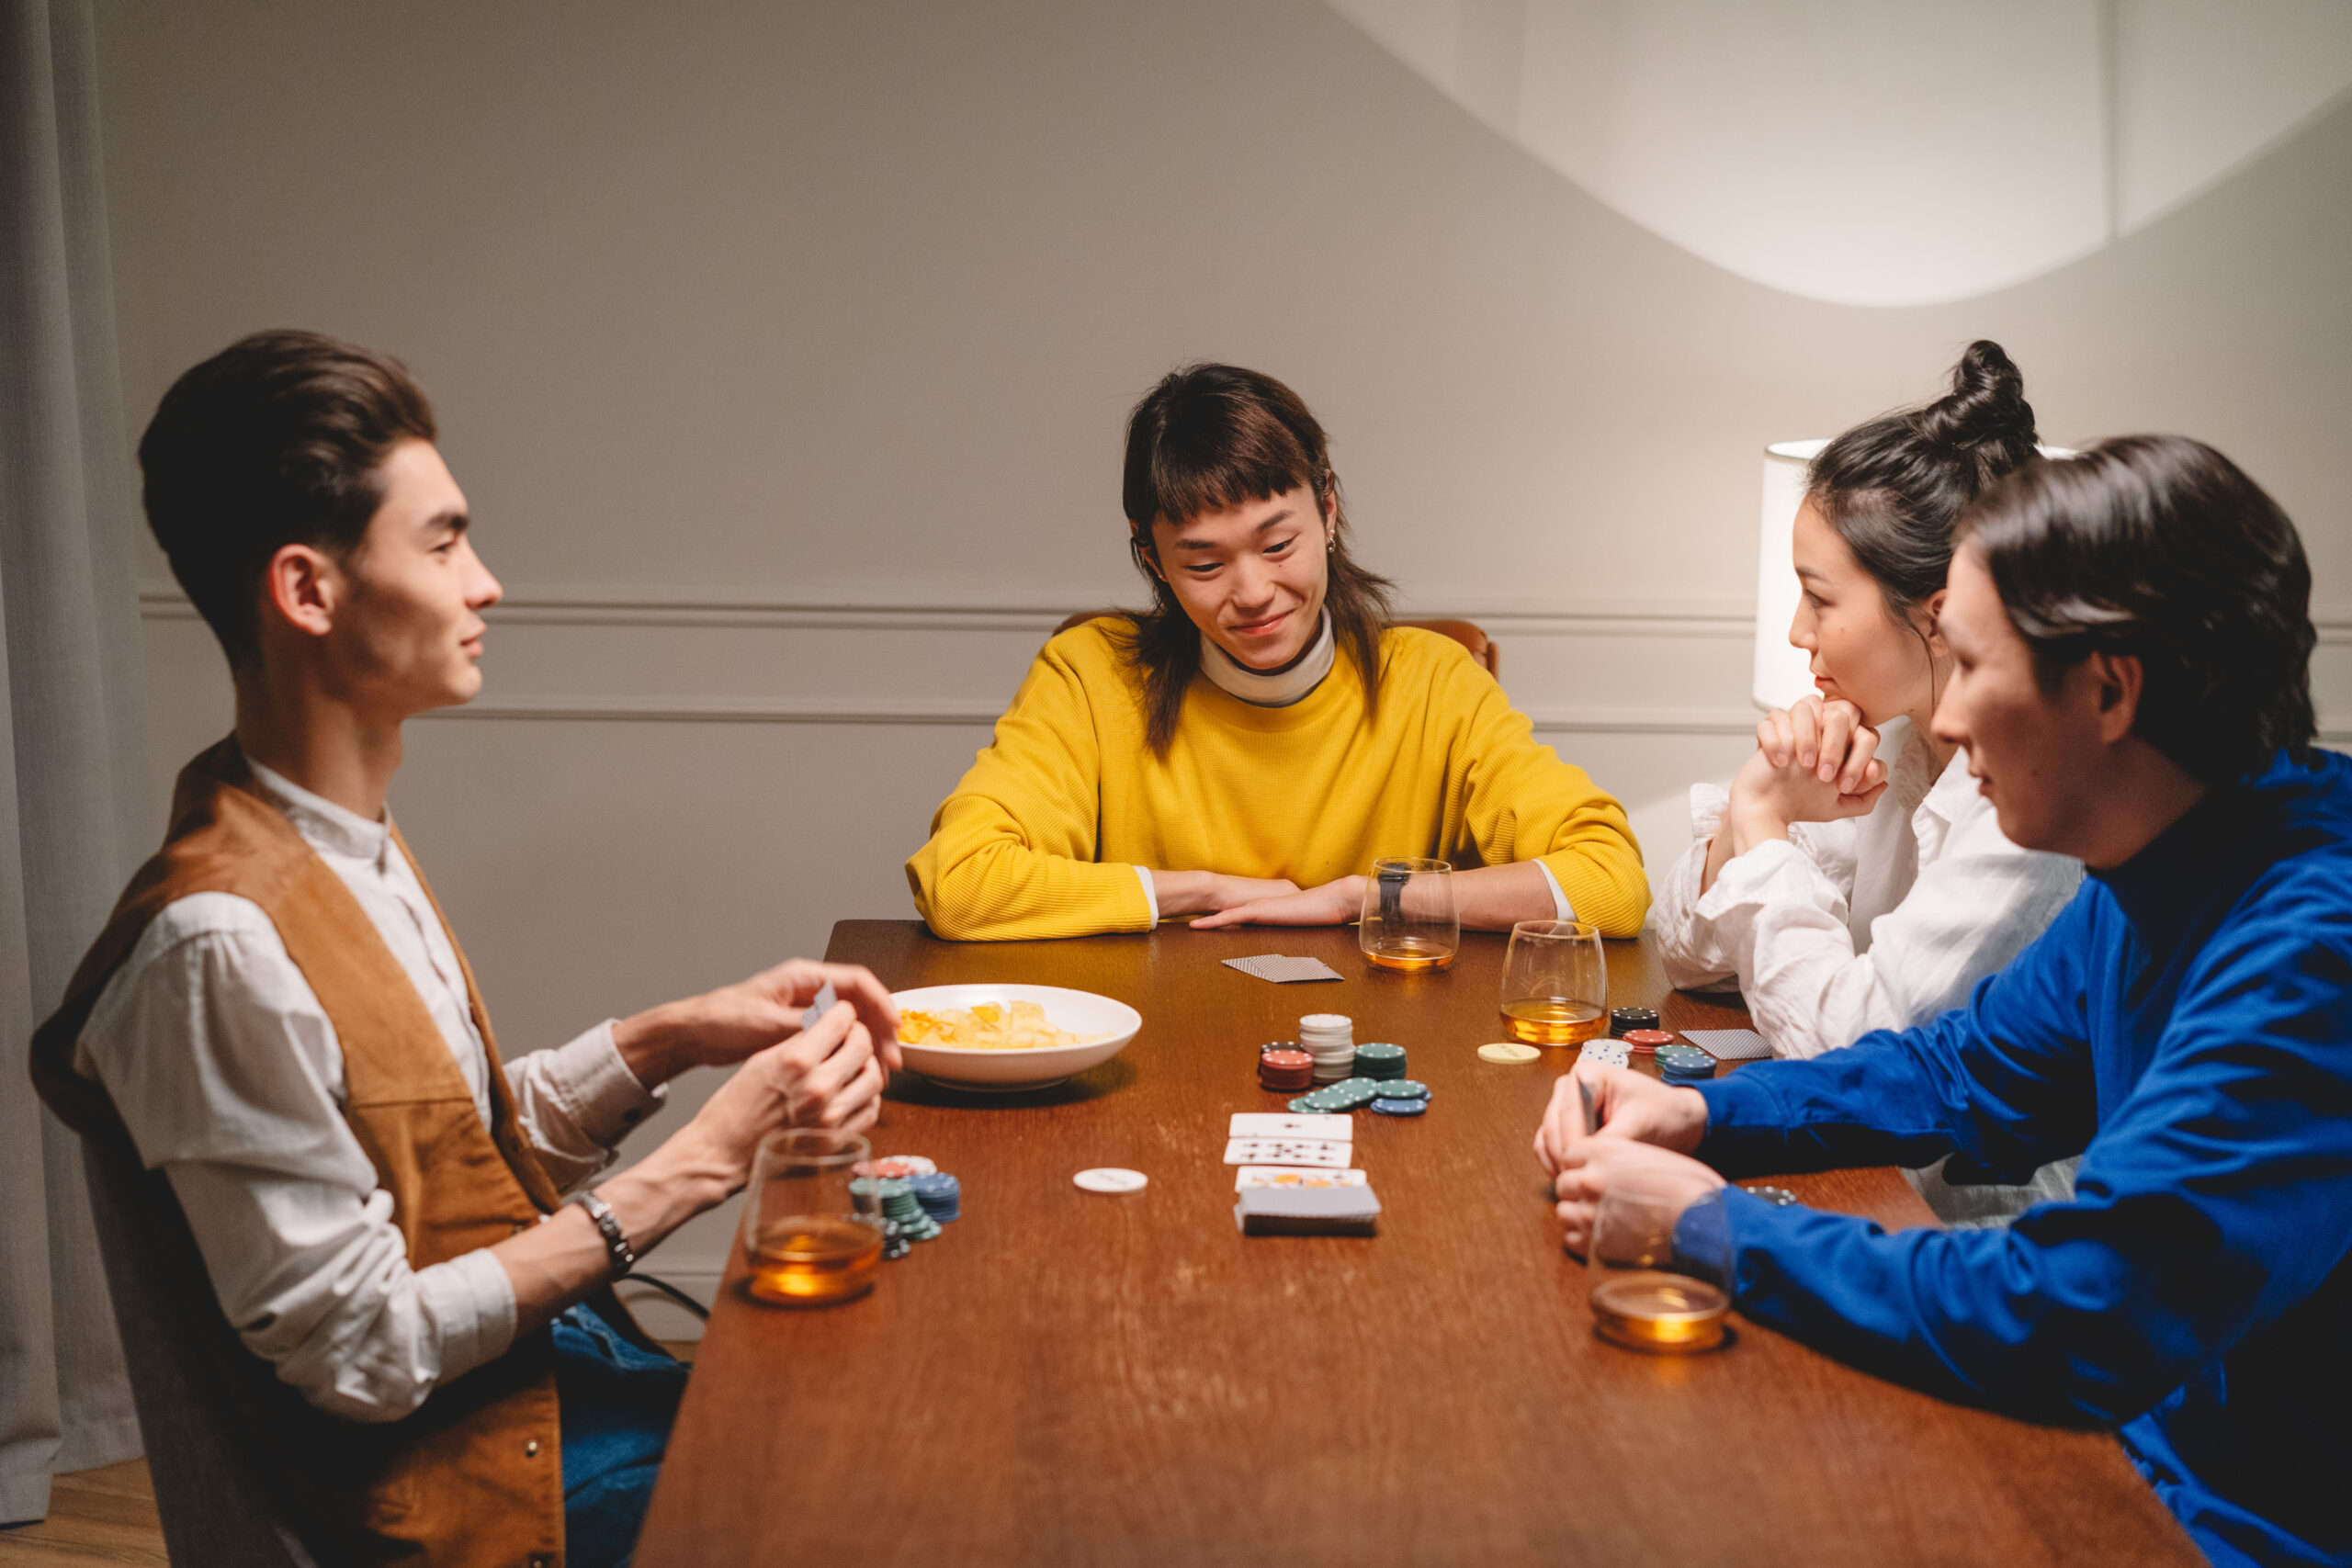 4 Useful Habits You Can Learn From Playing Poker